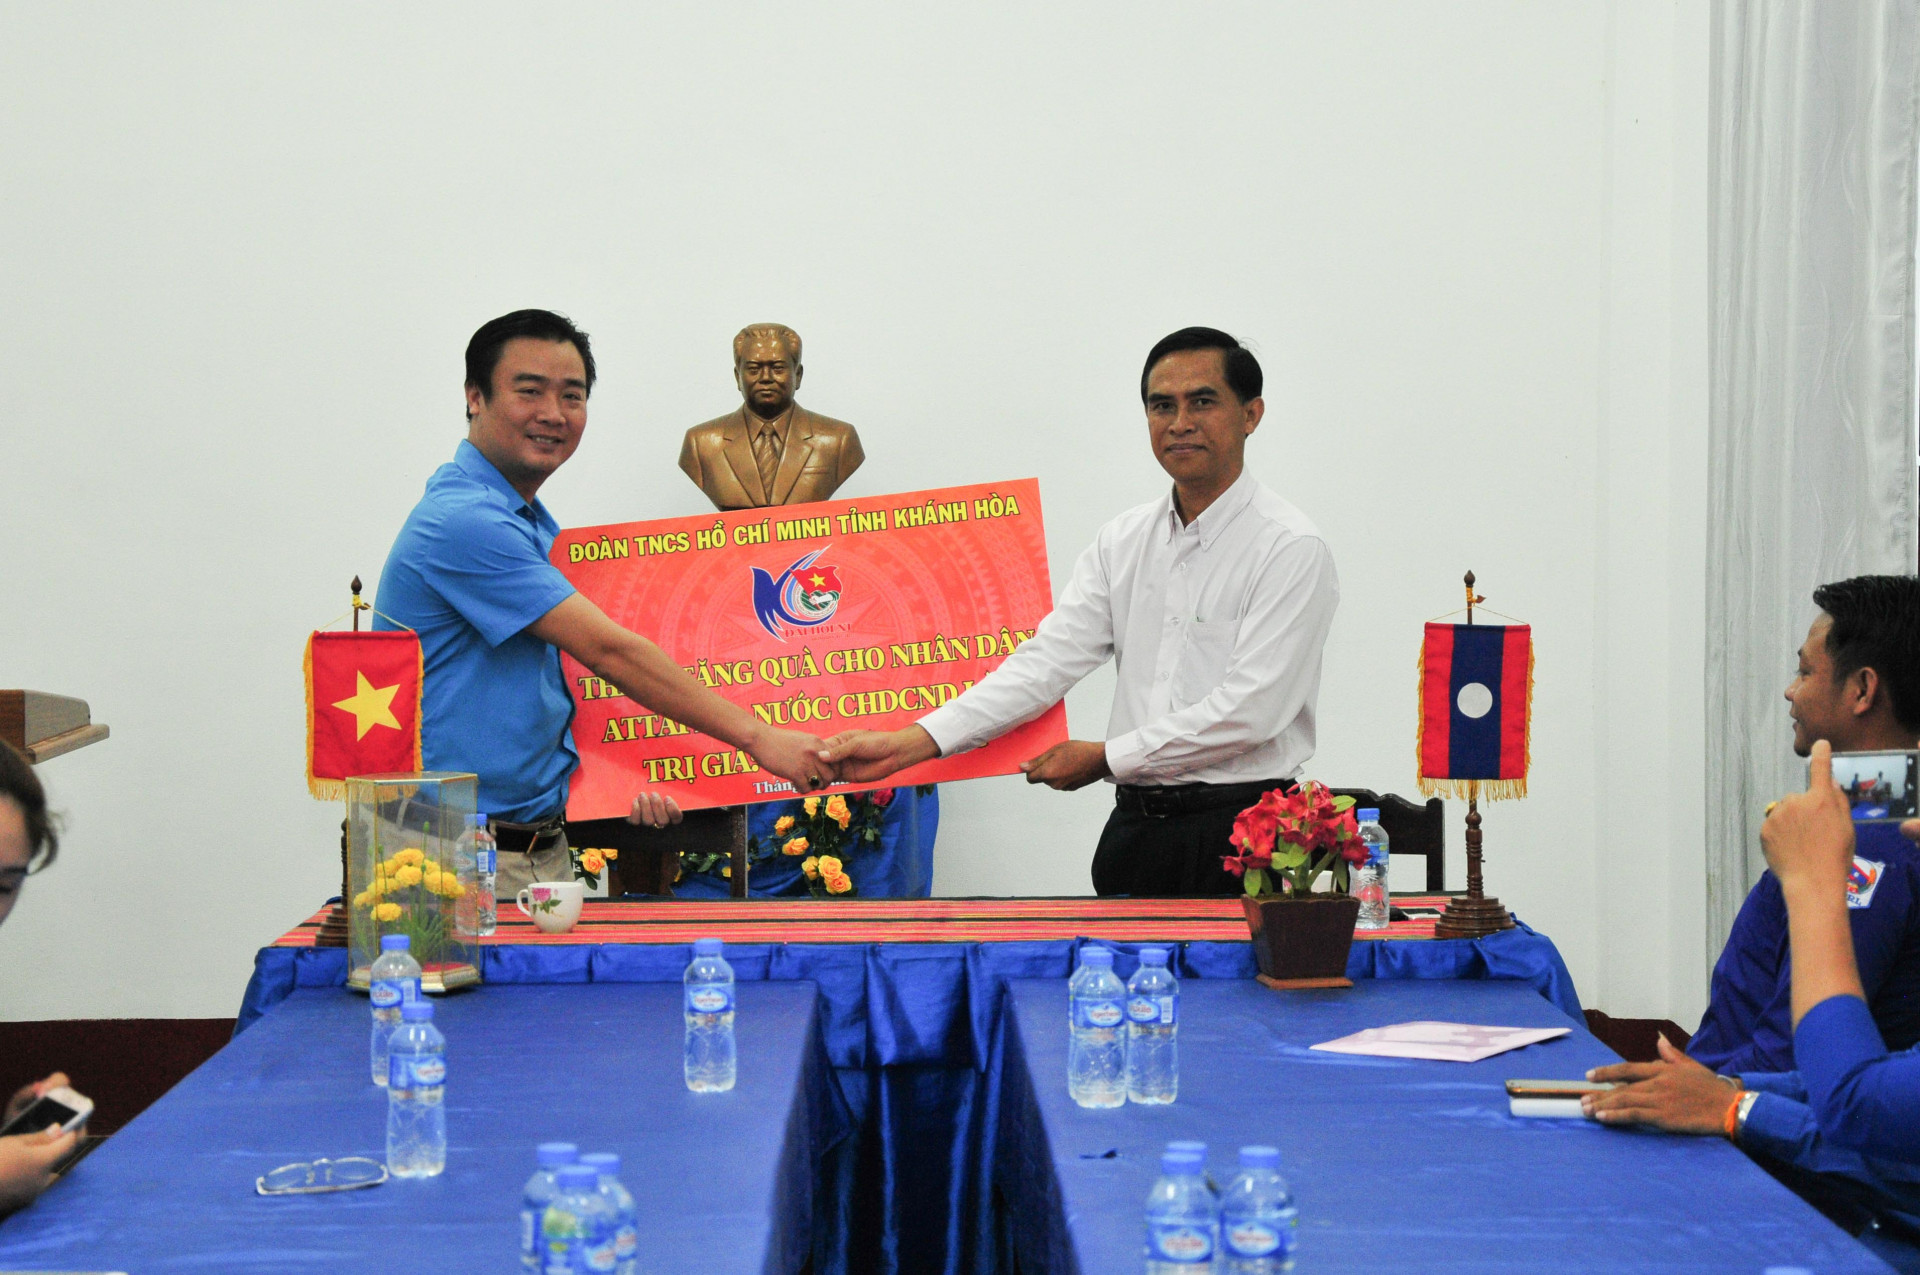 Khanh Hoa Youth Union’s Secretary meeting and offering gifts to leader of Attapeu Youth Union